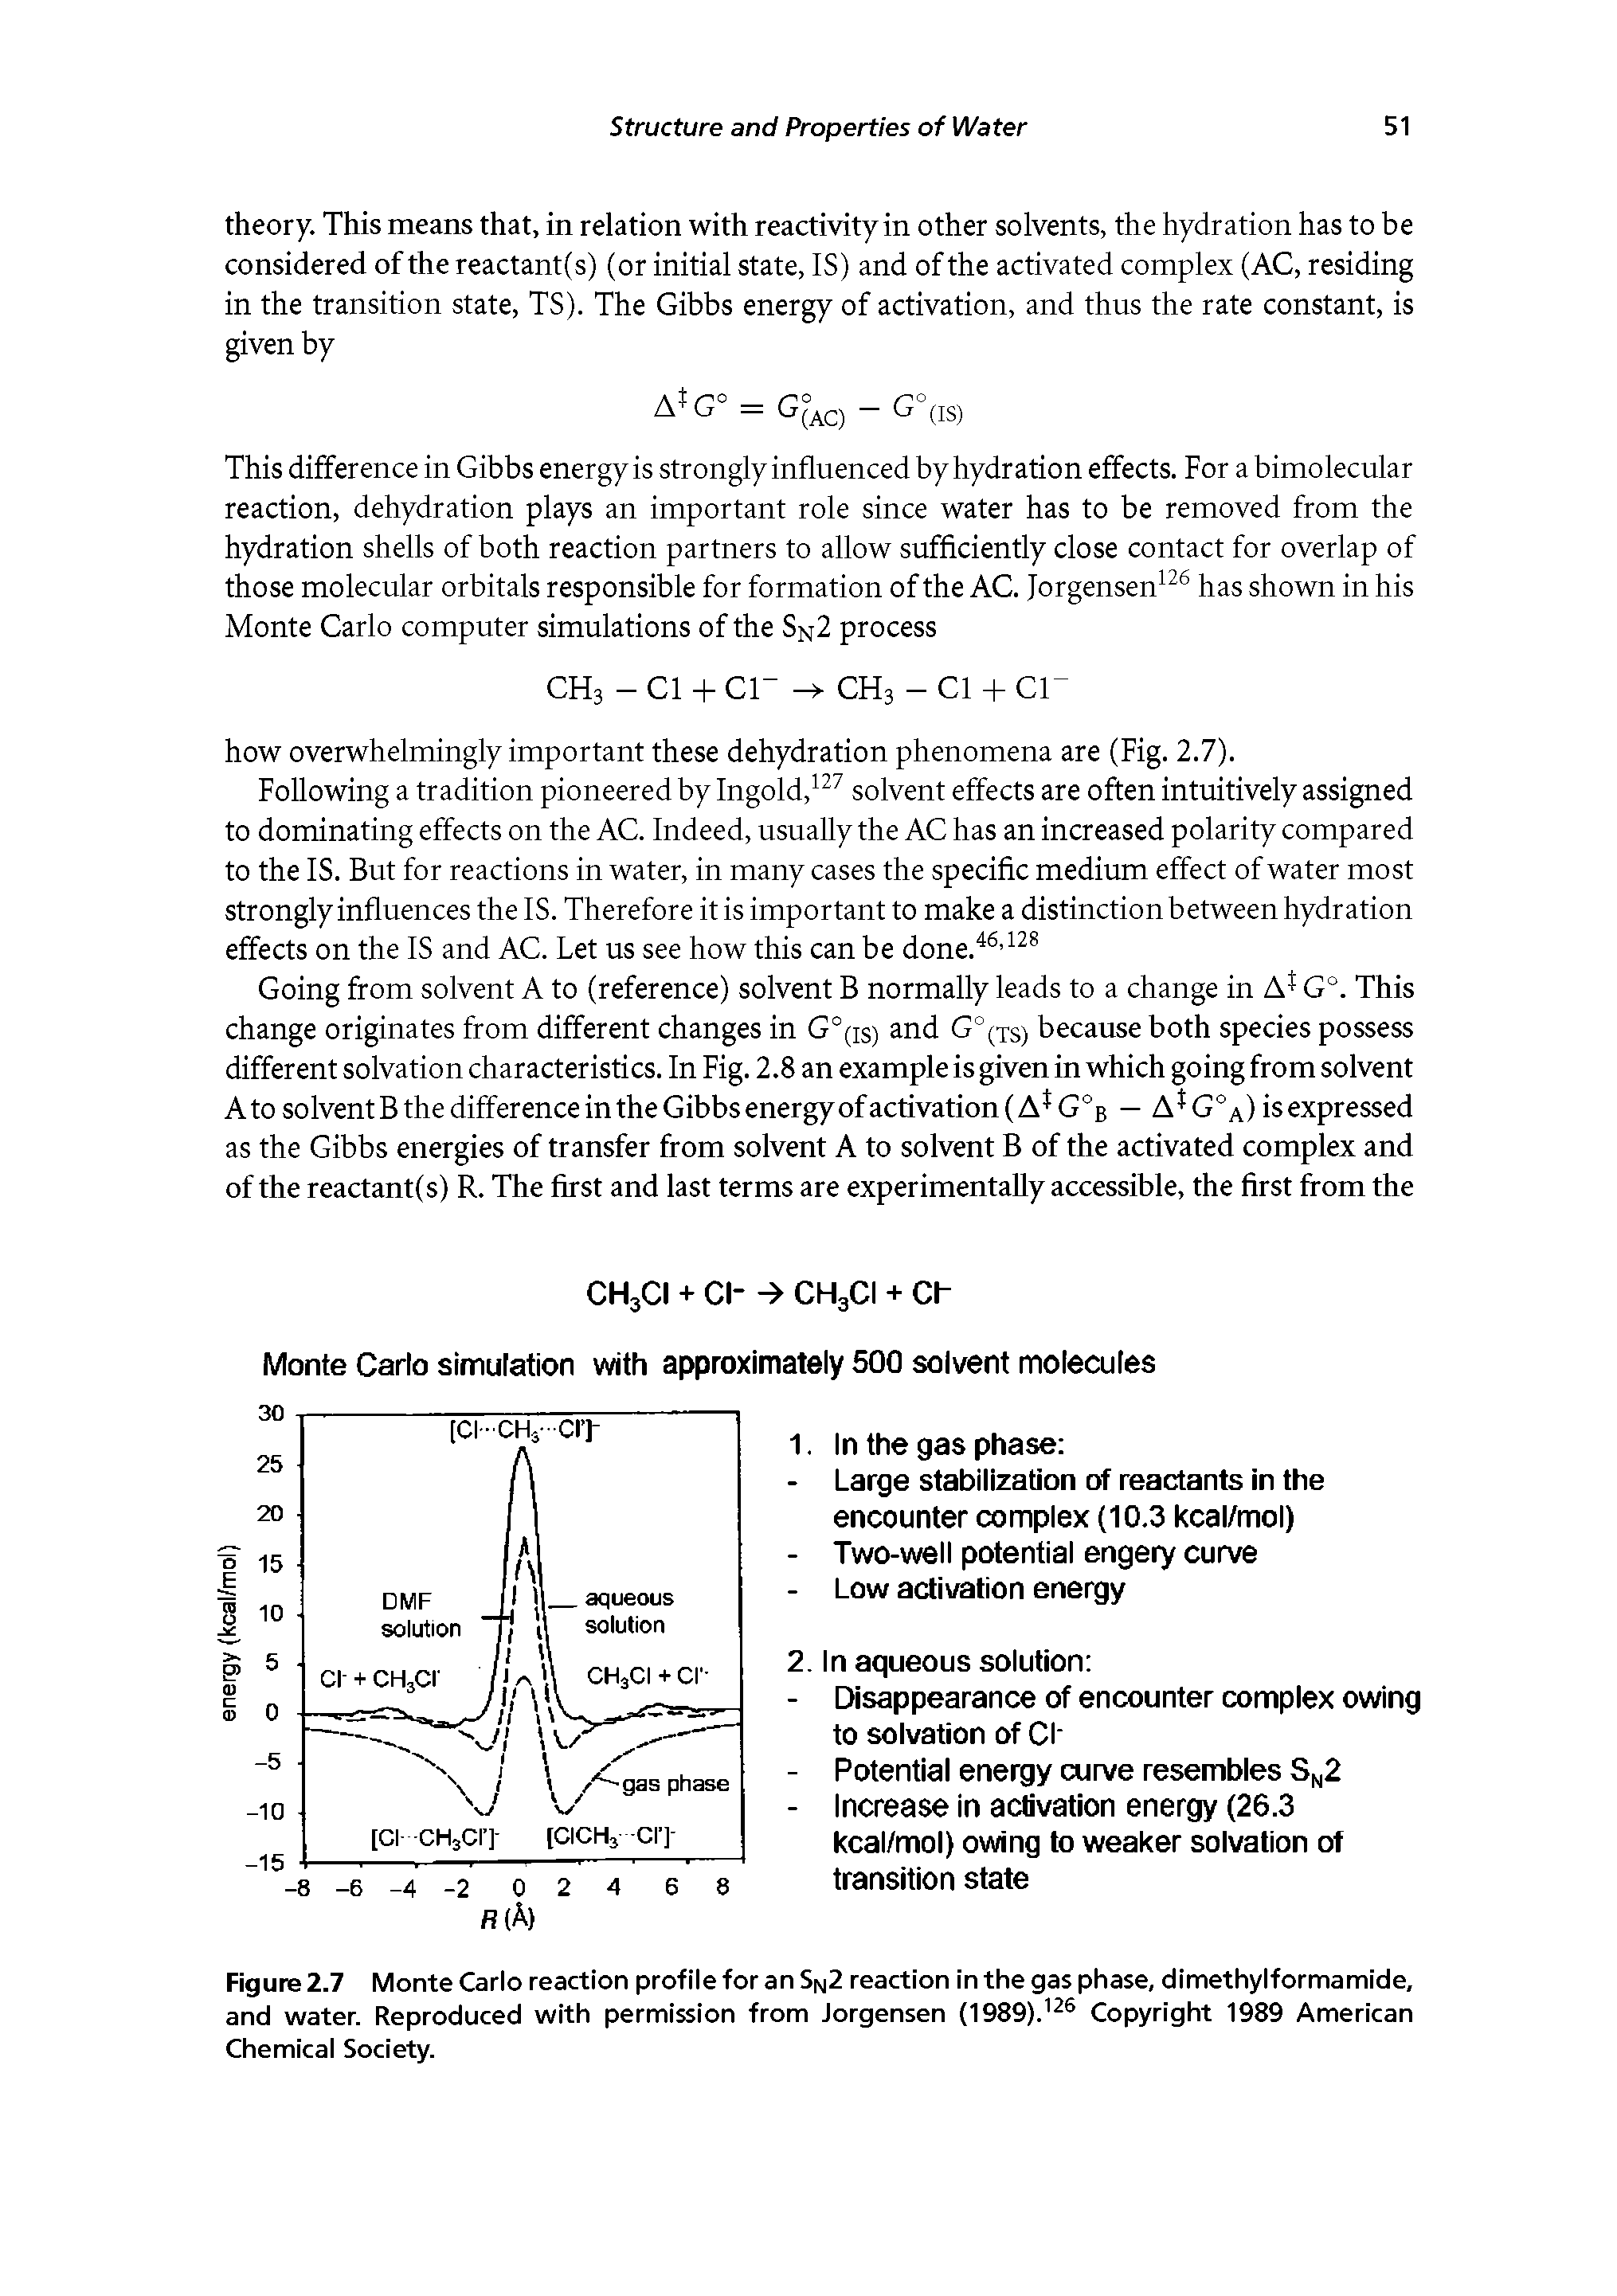 Figure 2.7 Monte Carlo reaction profile for an Sn2 reaction in the gas phase, dimethylformamide, and water. Reproduced with permission from Jorgensen (1989).Copyright 1989 American Chemical Society.